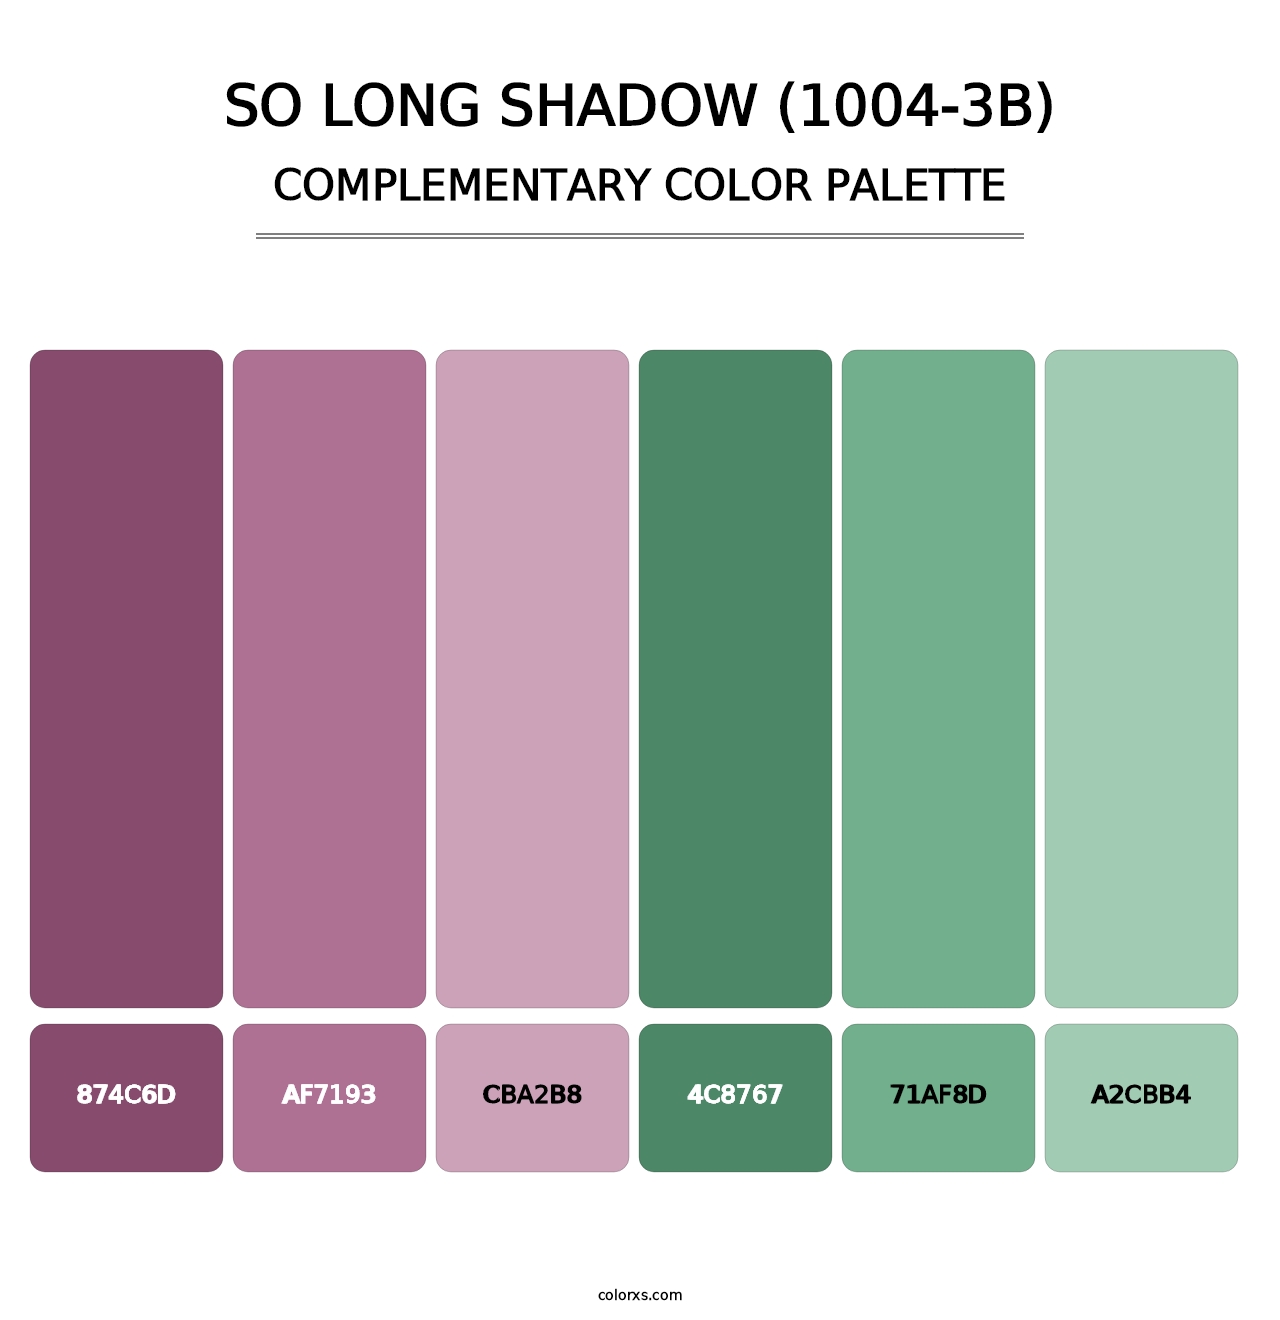 So Long Shadow (1004-3B) - Complementary Color Palette